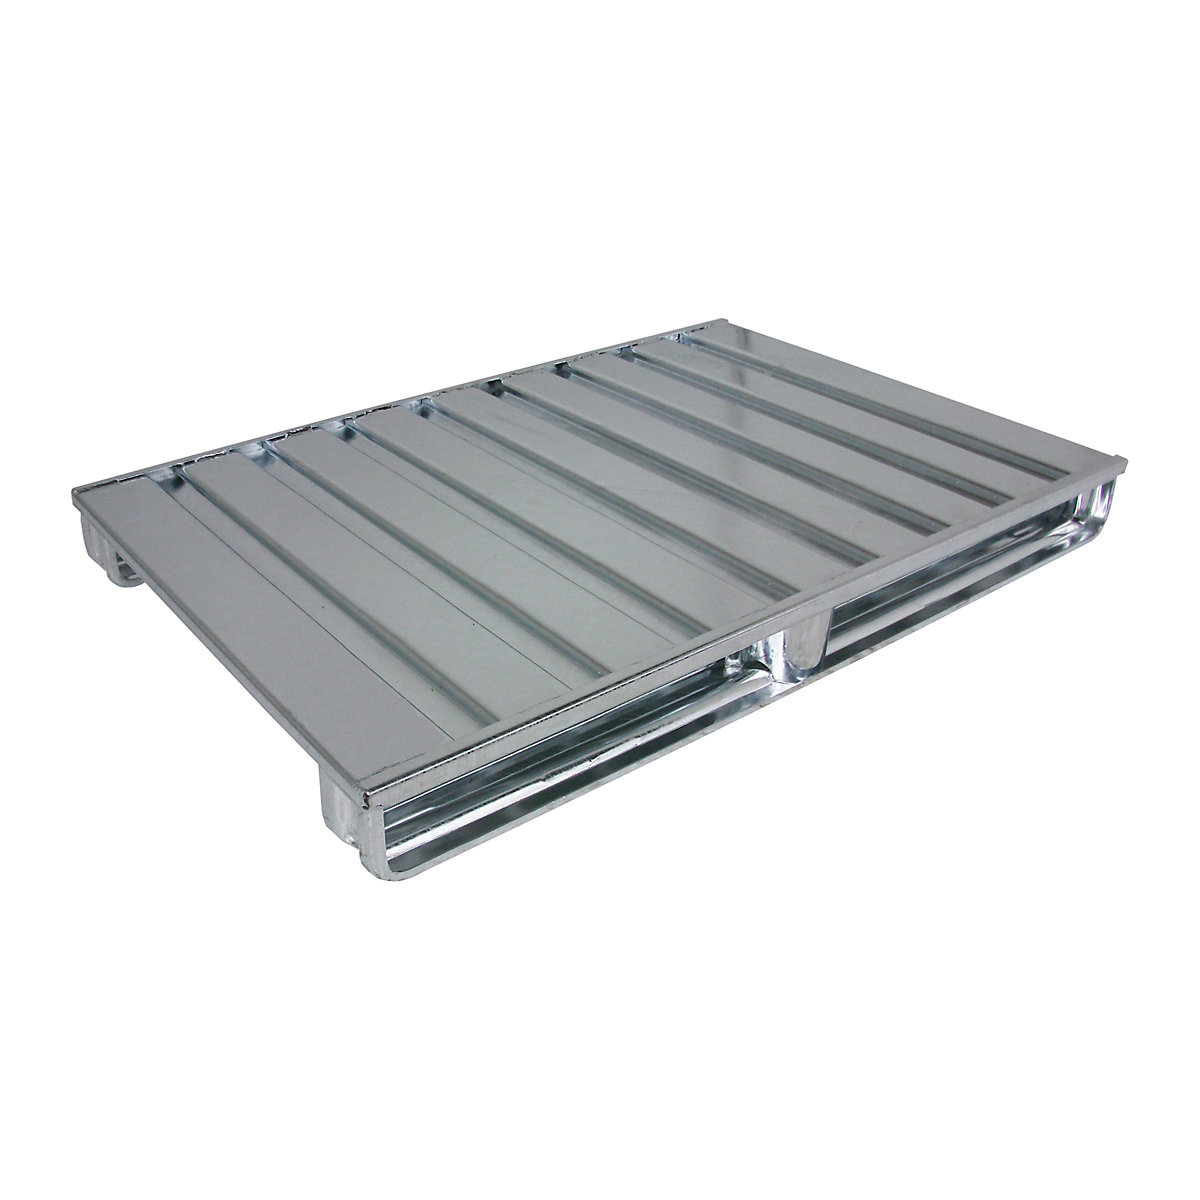 Flat steel pallet – Heson, LxW 1200 x 1000 mm, max. load 2000 kg, zinc plated, 10+ items-5